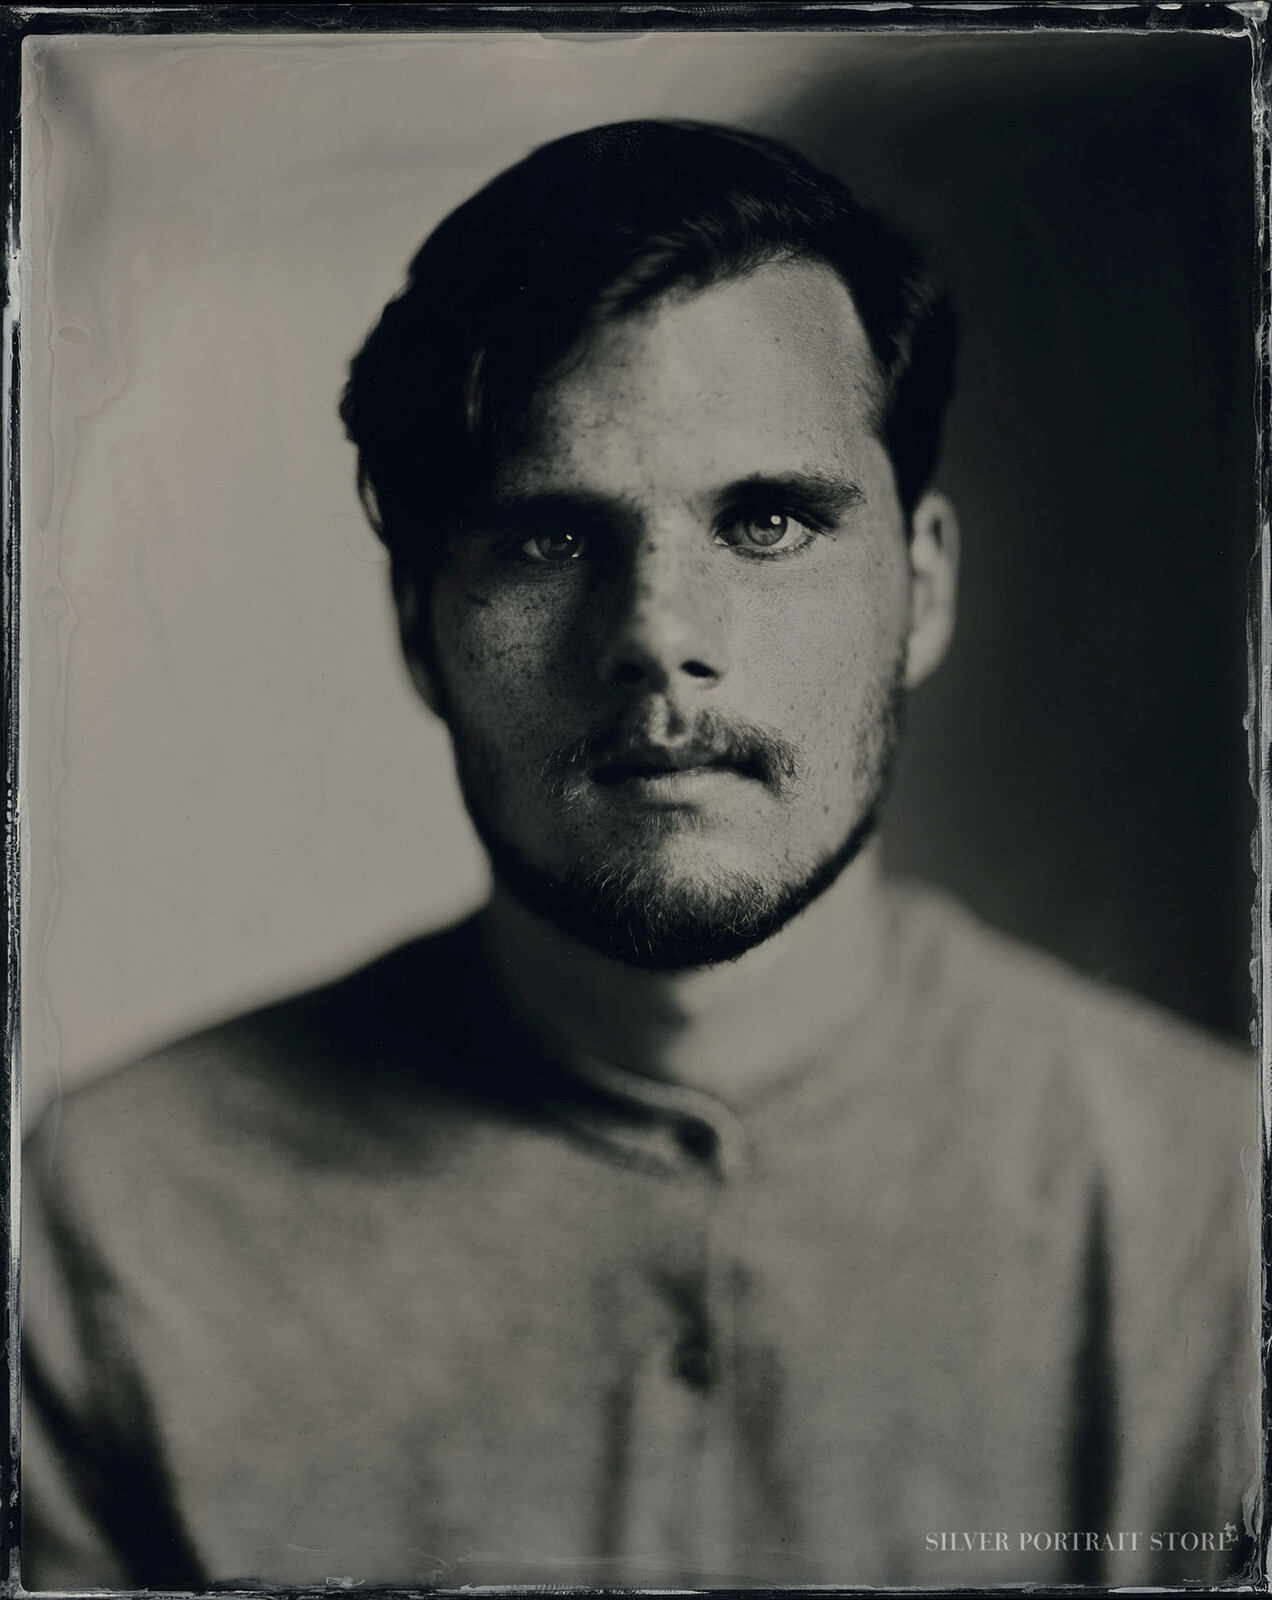 Max-Silver Portrait Store-Scan from Wet plate collodion-Tintype 20 x 25 cm